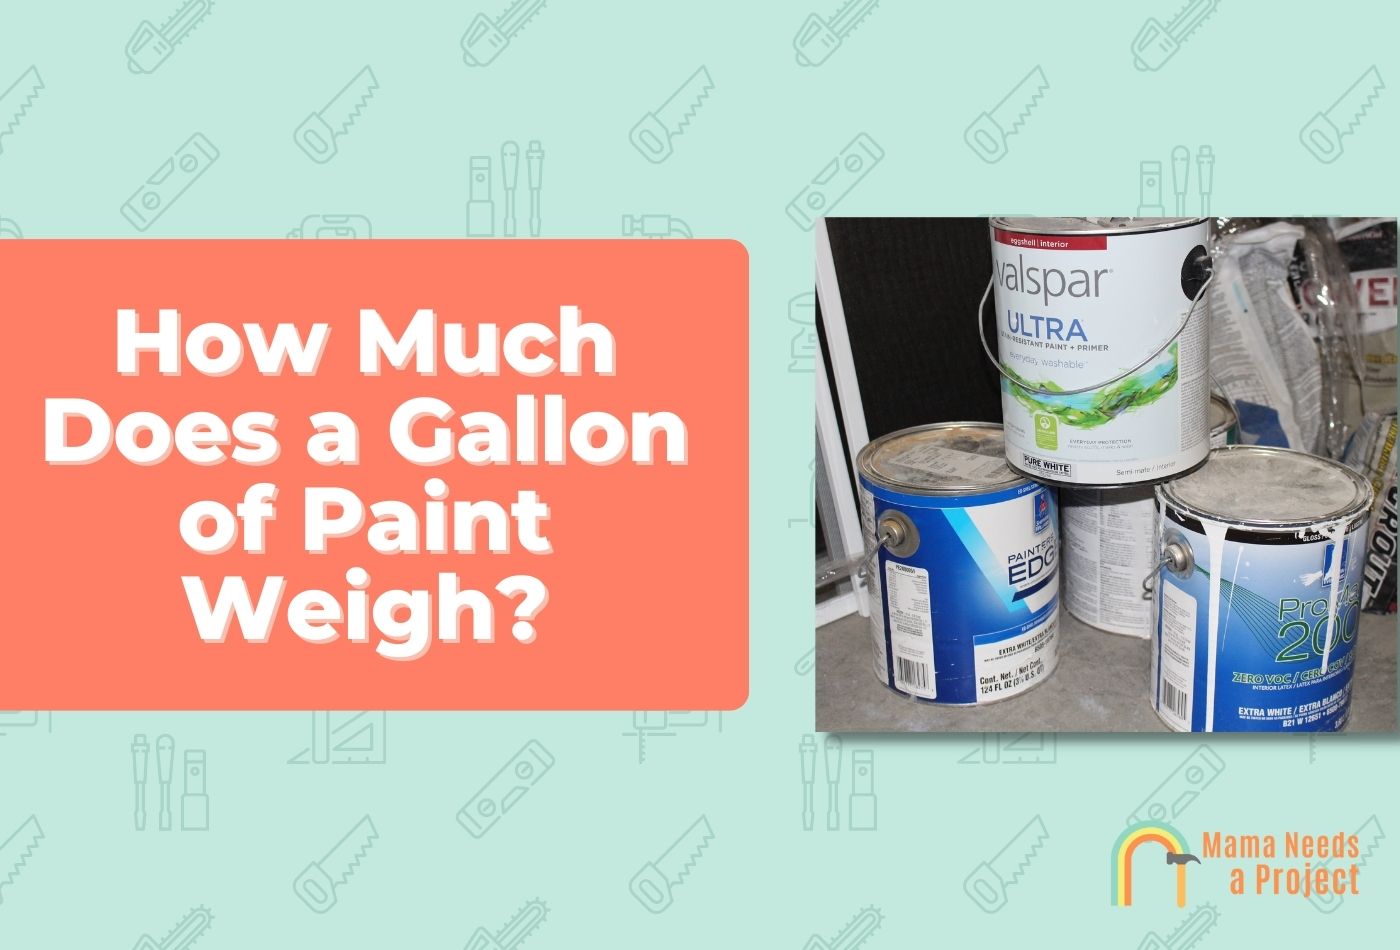 How Much Does a Gallon of Paint Weigh